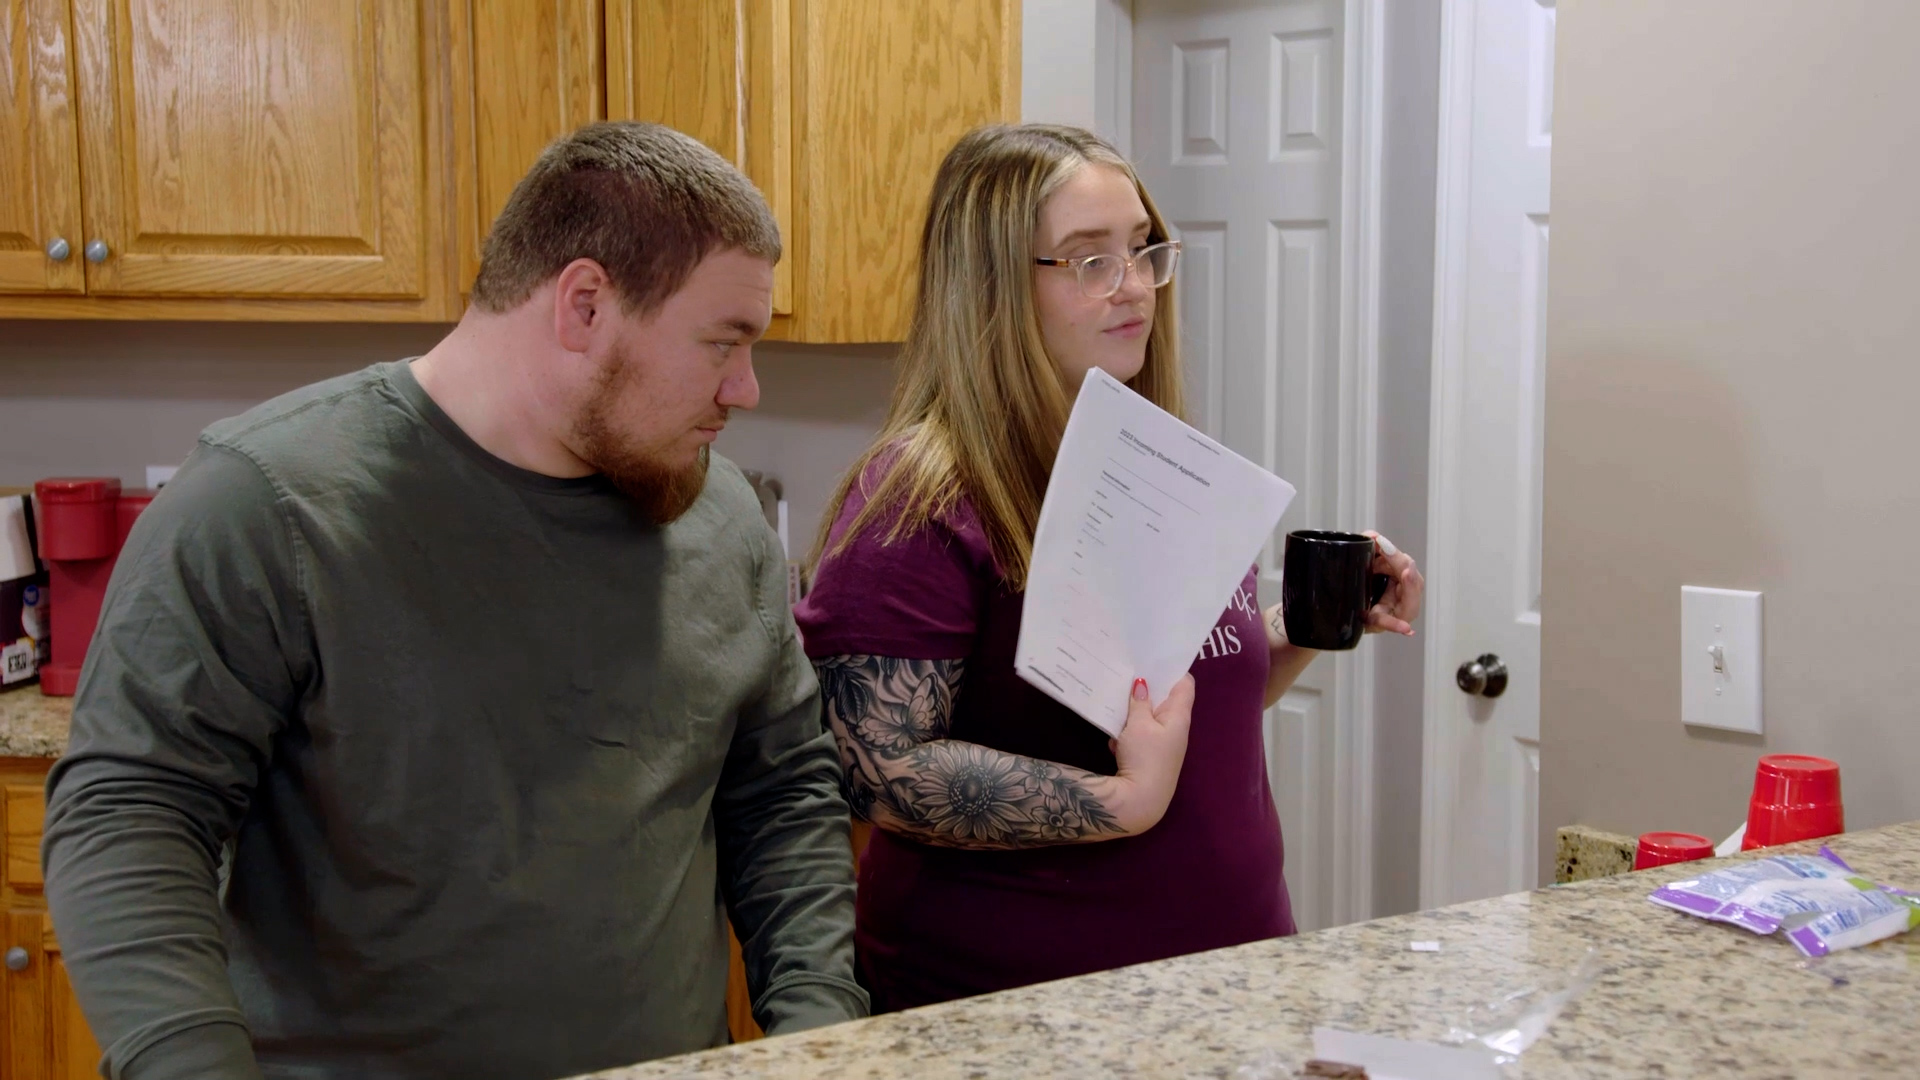 Watch Alana's Caught Red-Handed! | Mama June: From Not to Hot Video Extras